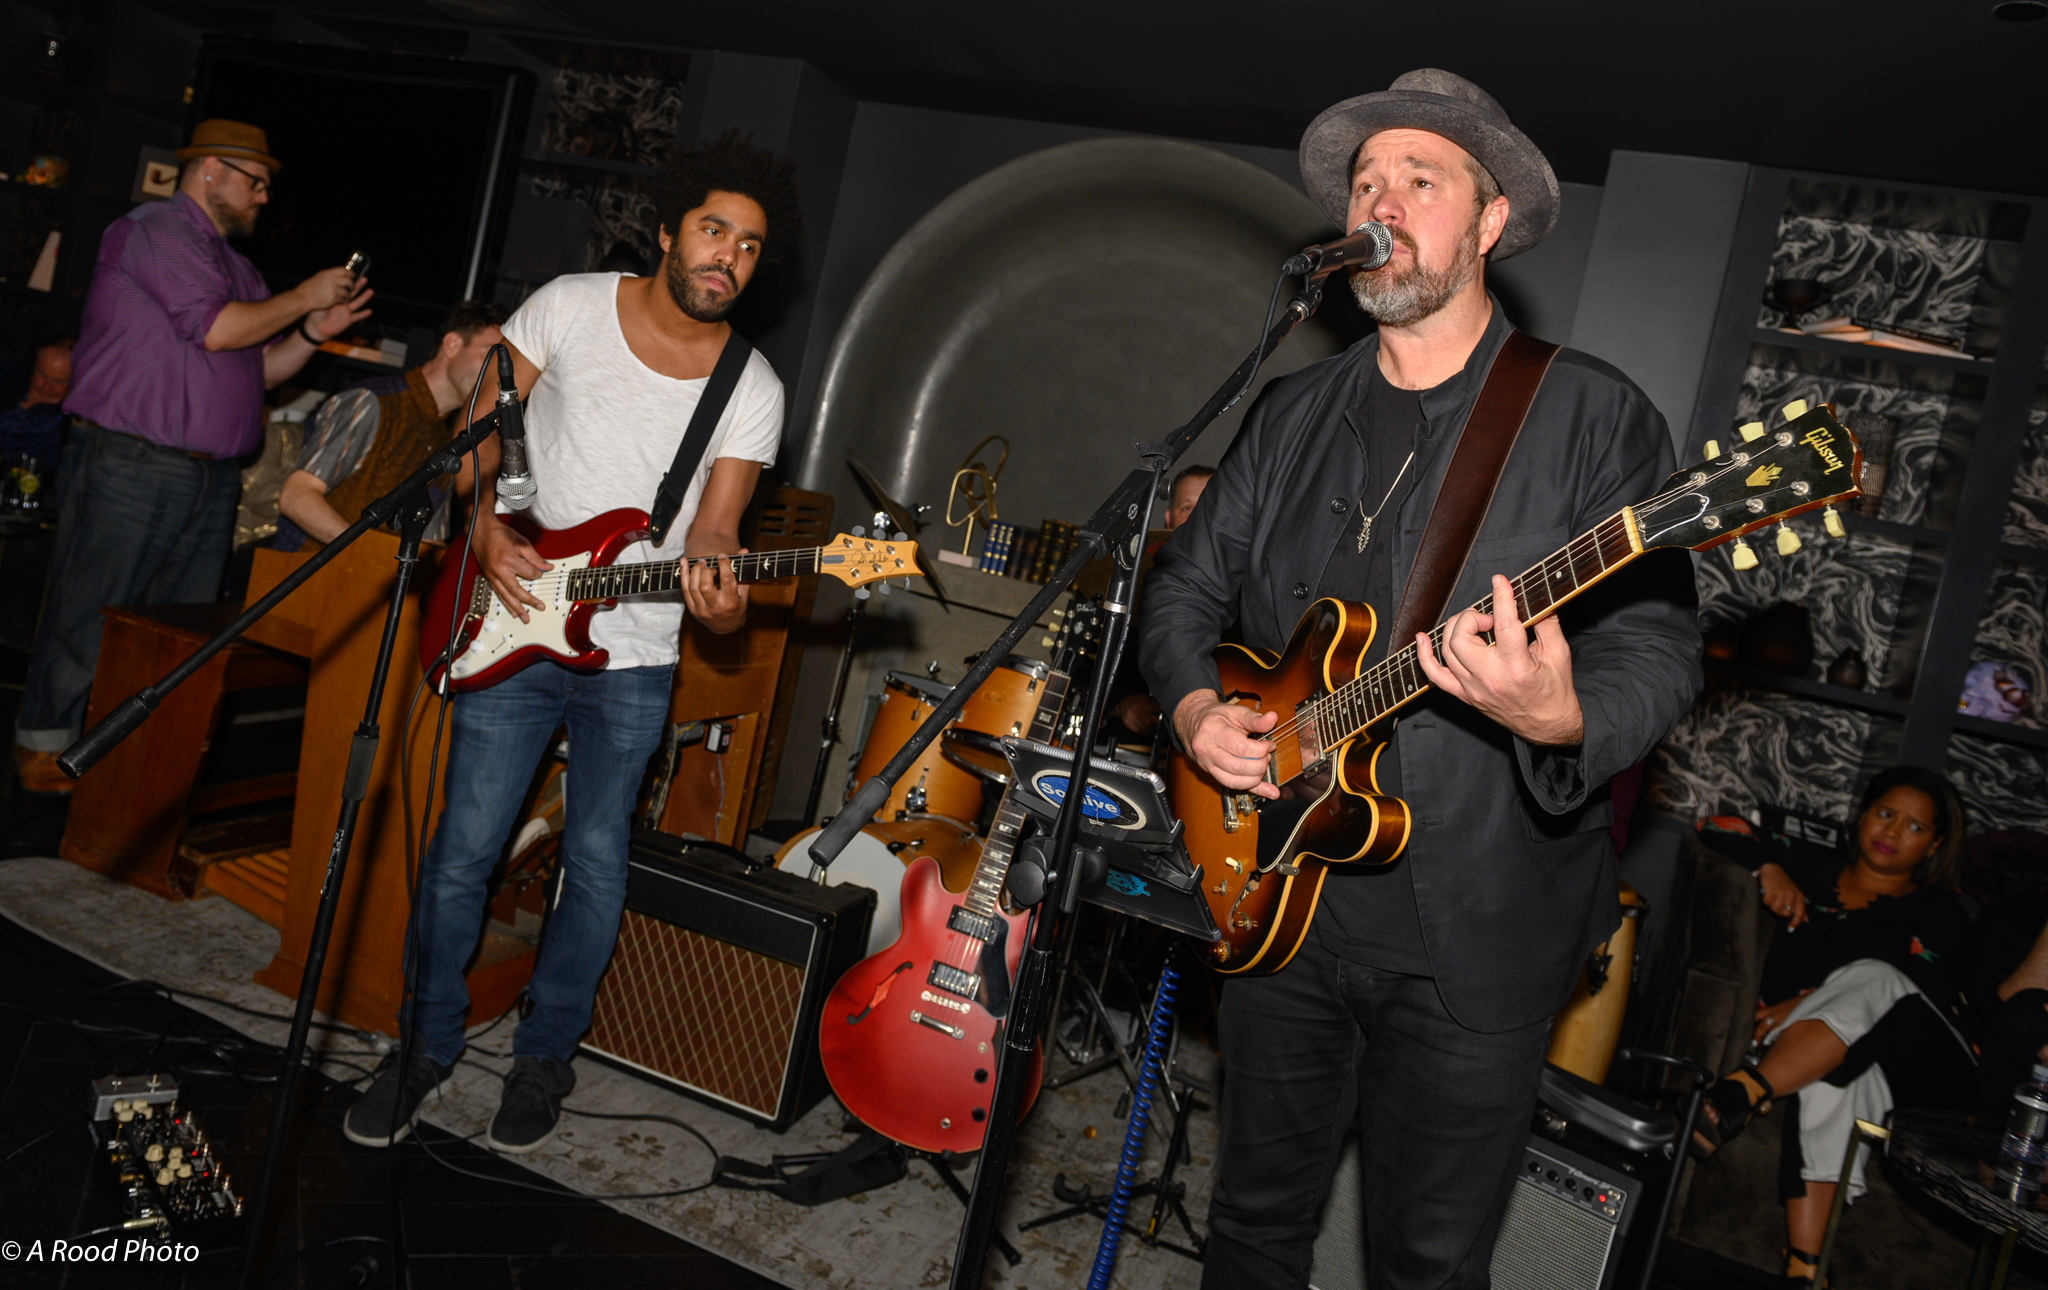 Eric Krasno Jams with Tash Neal, James VIII and More in Los Angeles (A Gallery)